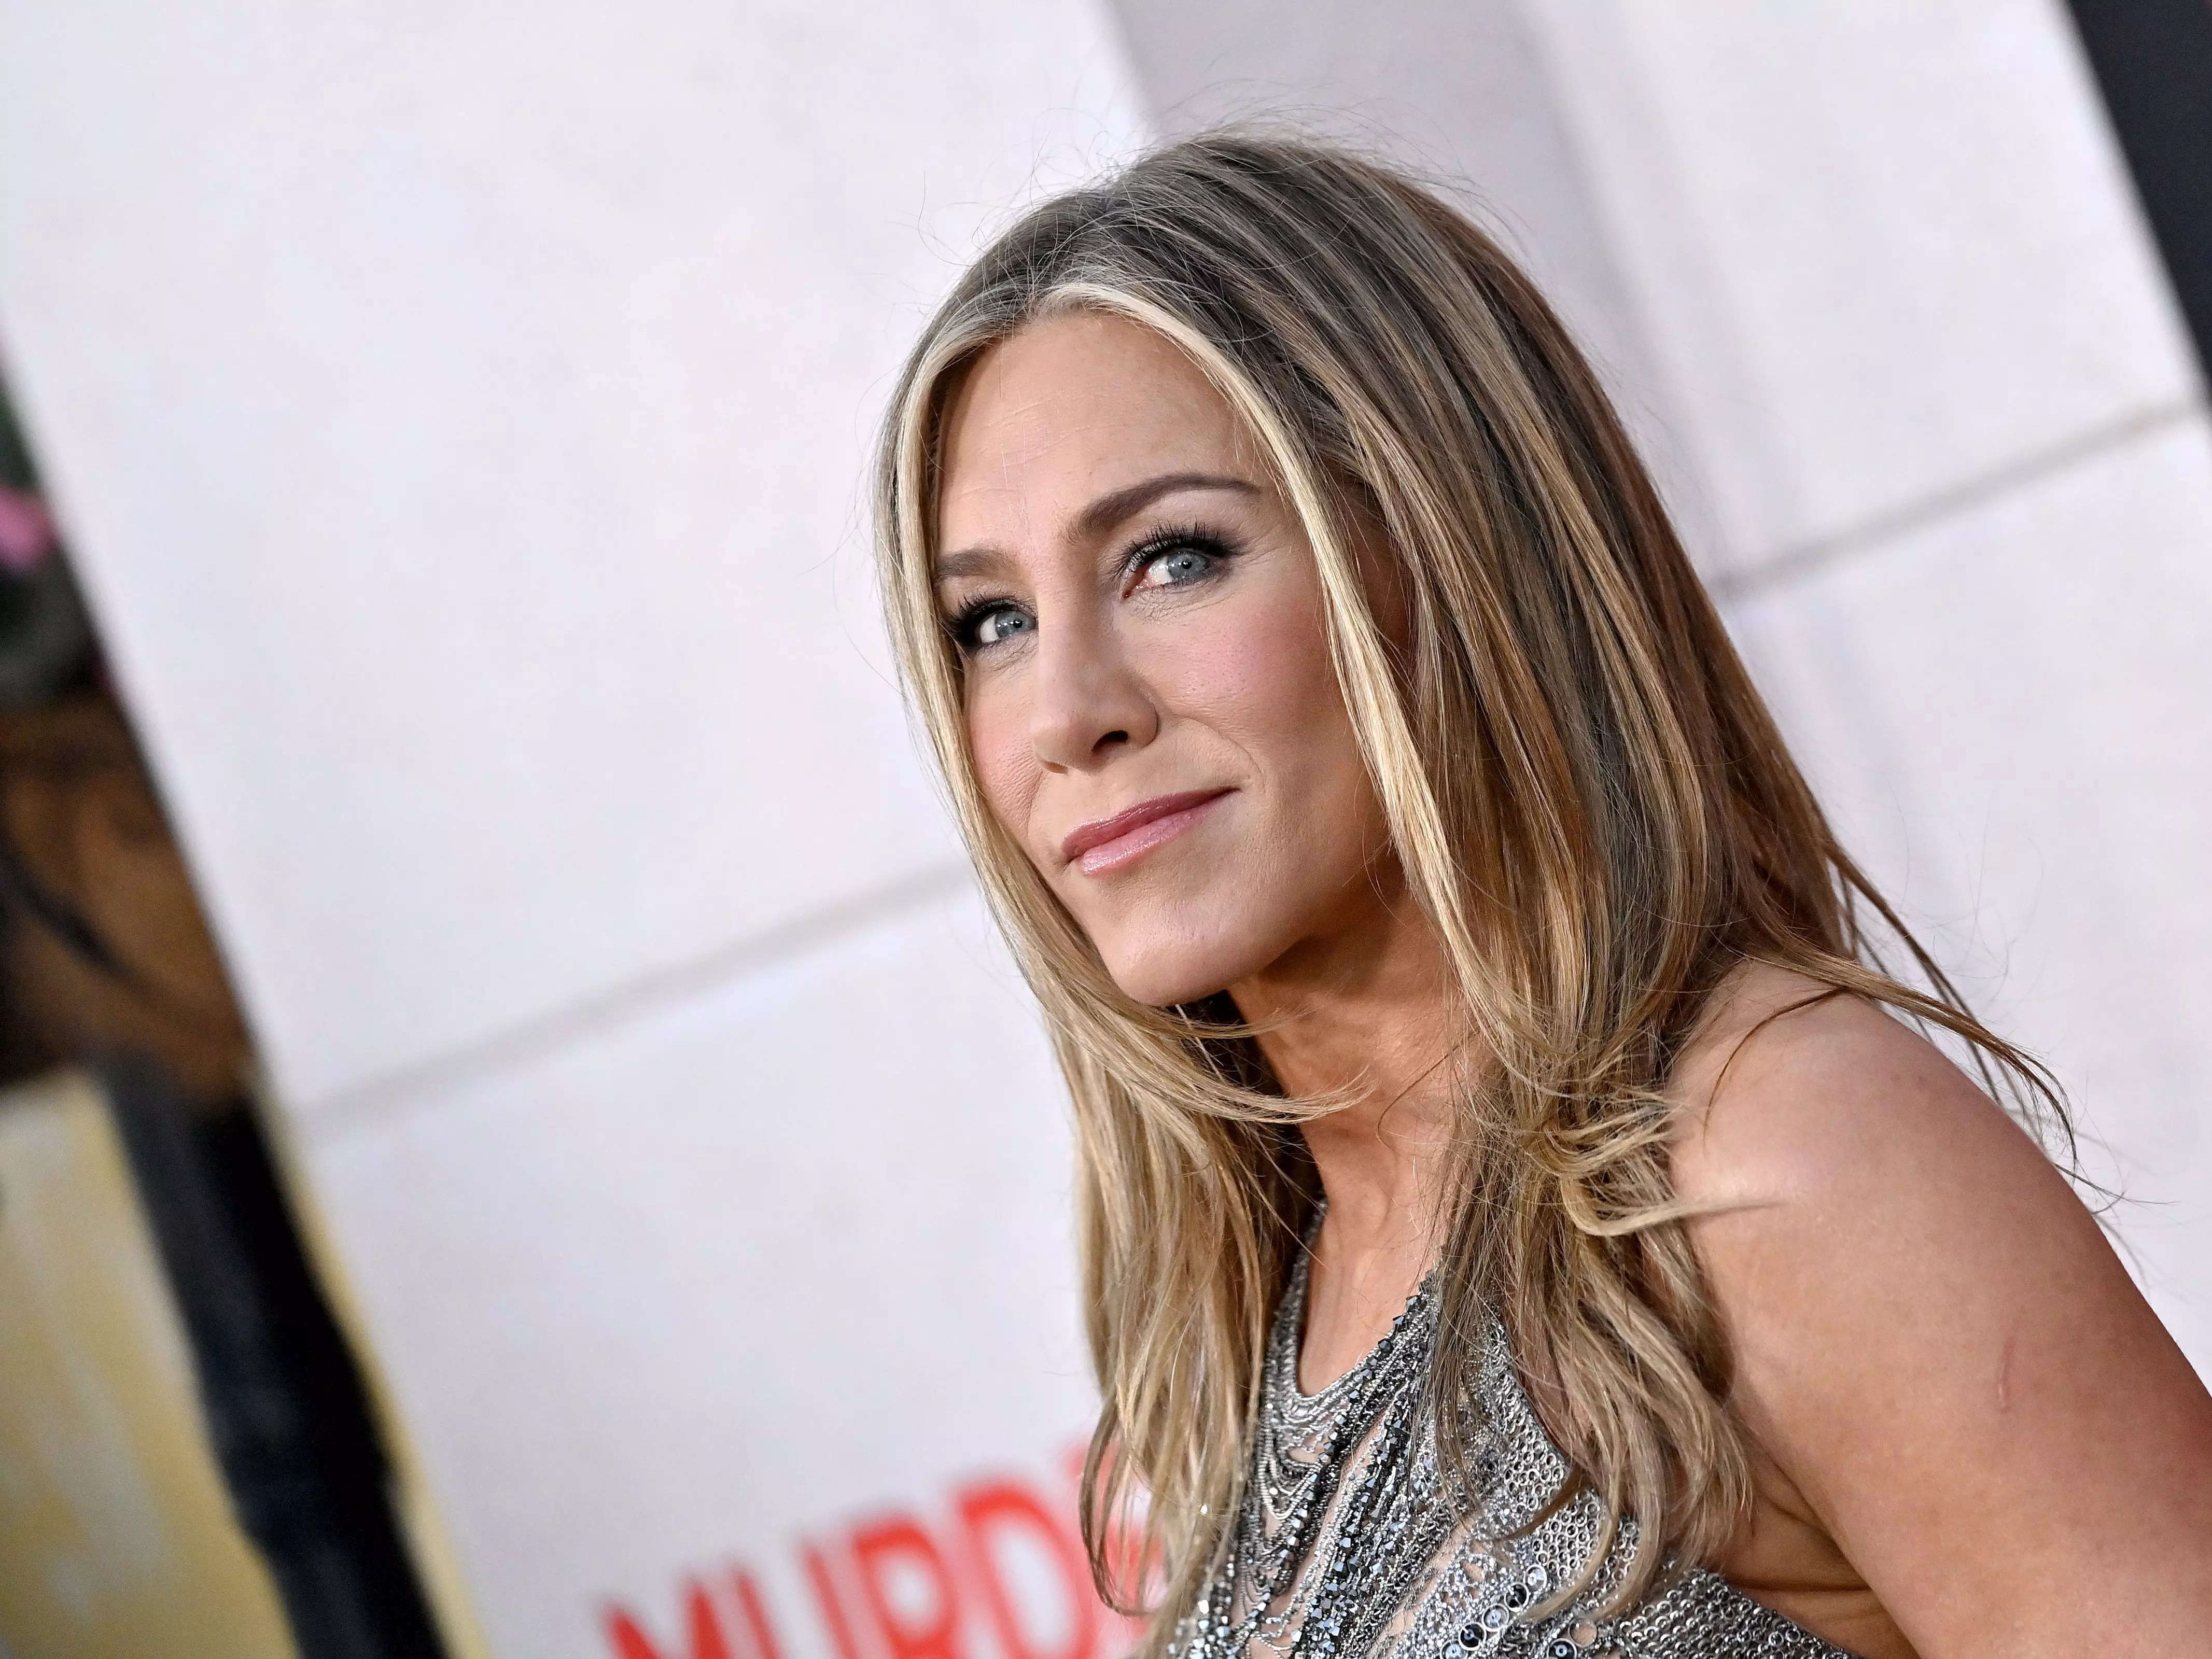 Here's How Jennifer Aniston Is Embracing Her Grays